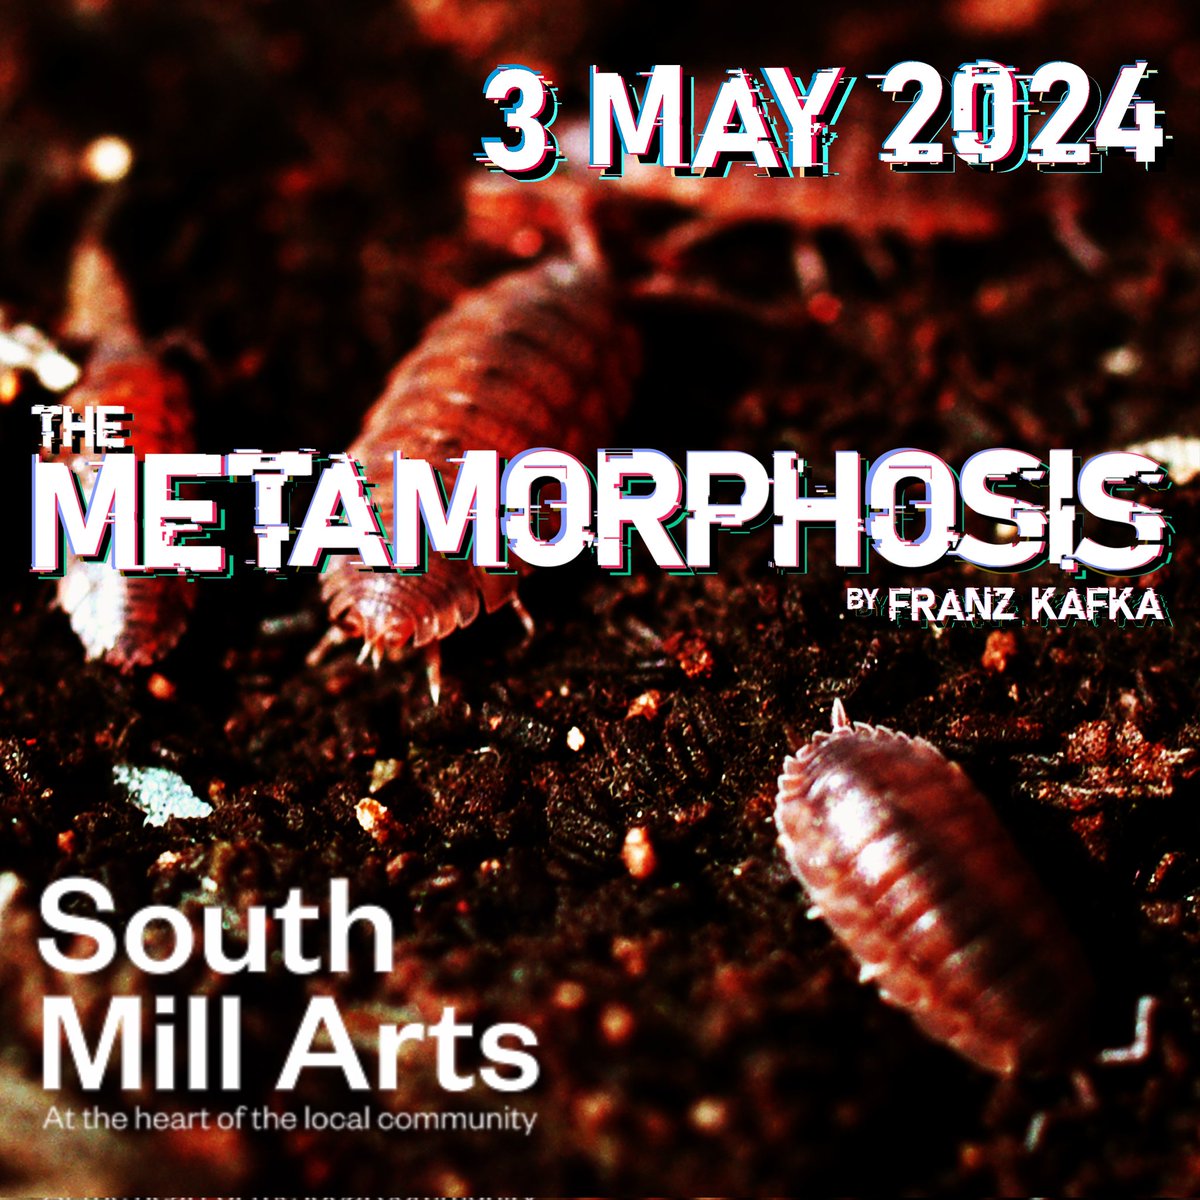 The Metamorphosis will be playing at South Mill Arts, Bishop's Stortford on Friday 3 May @southmillarts
Tickets on sale
mildperiltheatre.co.uk/Tour-dates/

#theatre #kafka #themetamorphosis #drama #independenttheatre #theatre  #touringtheatre #whatsontheatre #tourdates #bishopsstortford